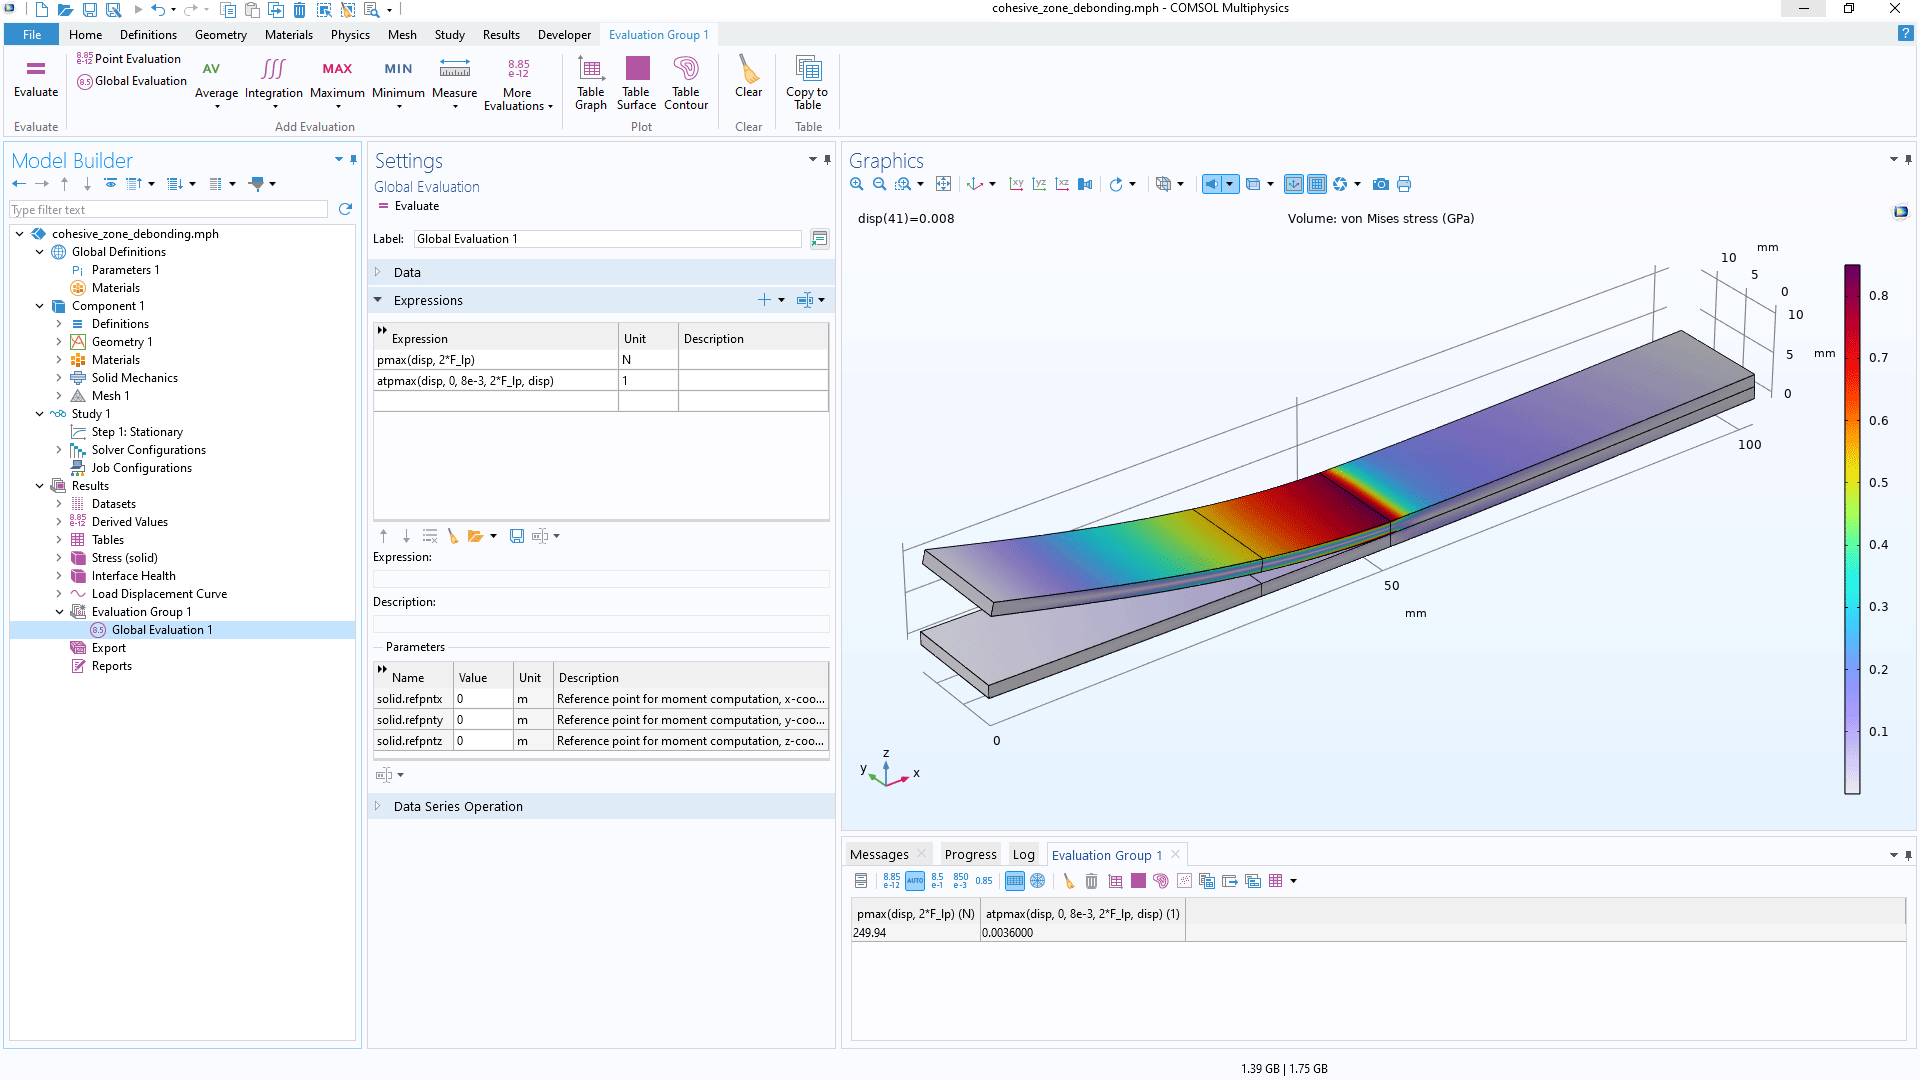 The COMSOL Multiphysics UI showing the Model Builder with a Global Evaluation node highlighted and the corresponding Settings window with built-in operators pmax and atpmax used within the expression table.